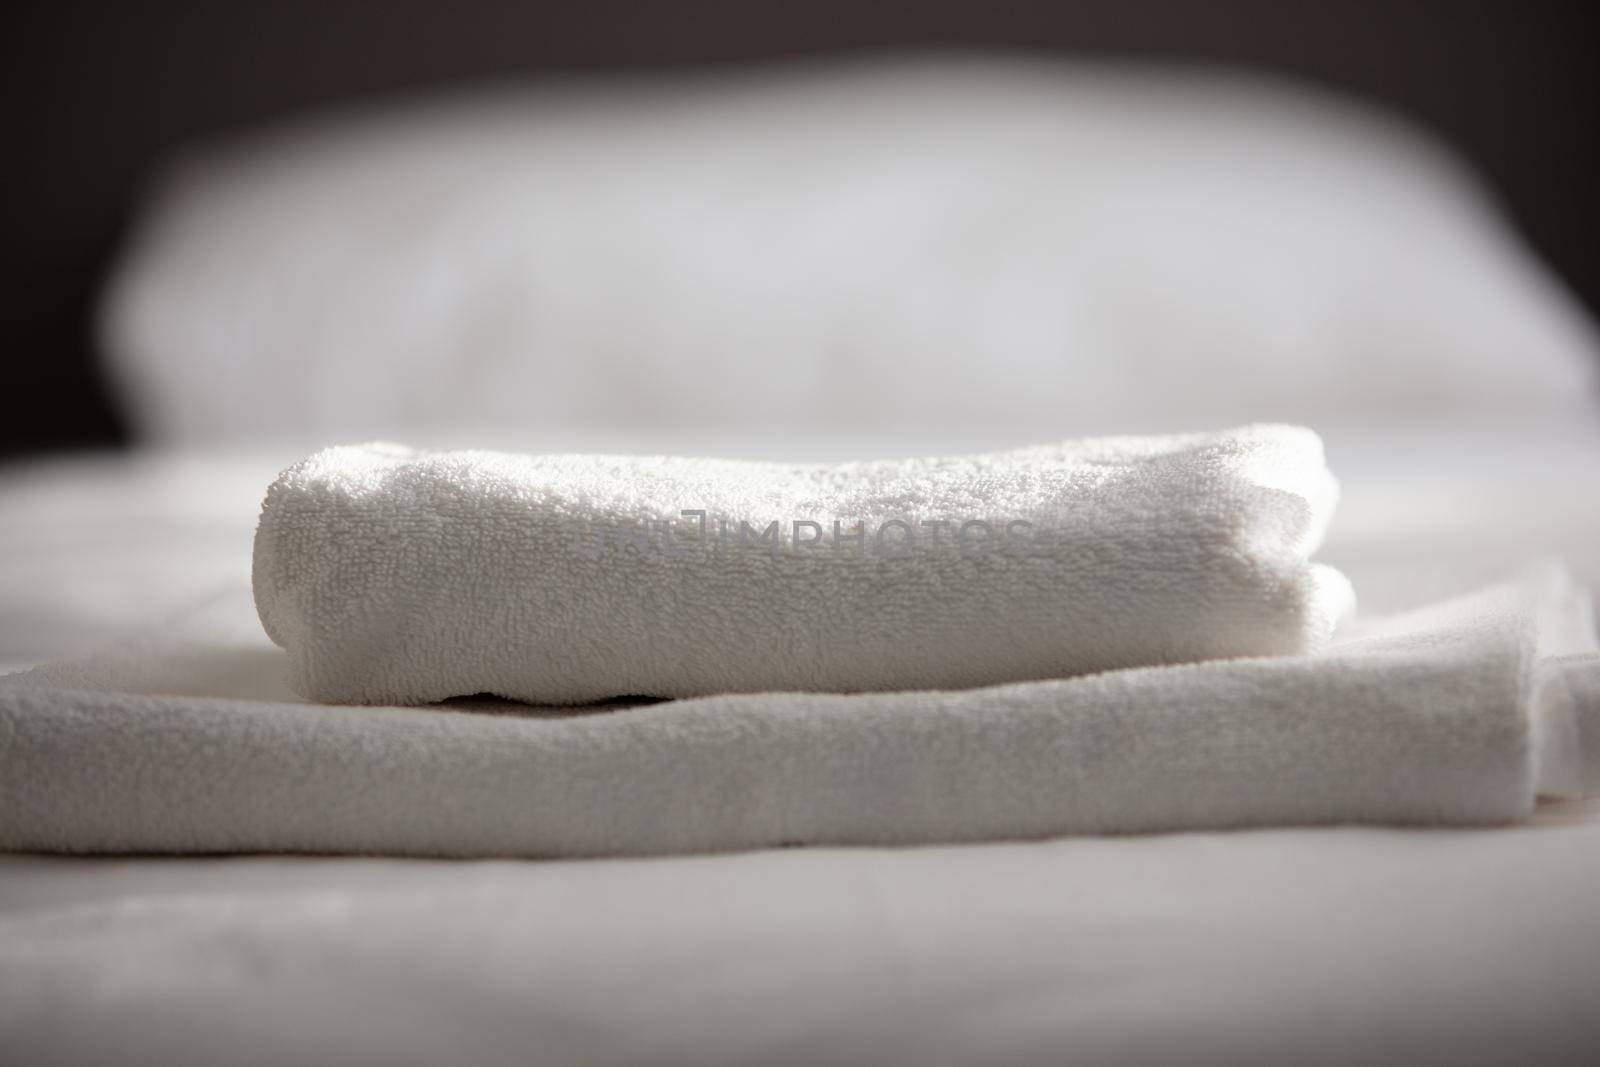 White clean towels stacked on the hotel bed by senkaya